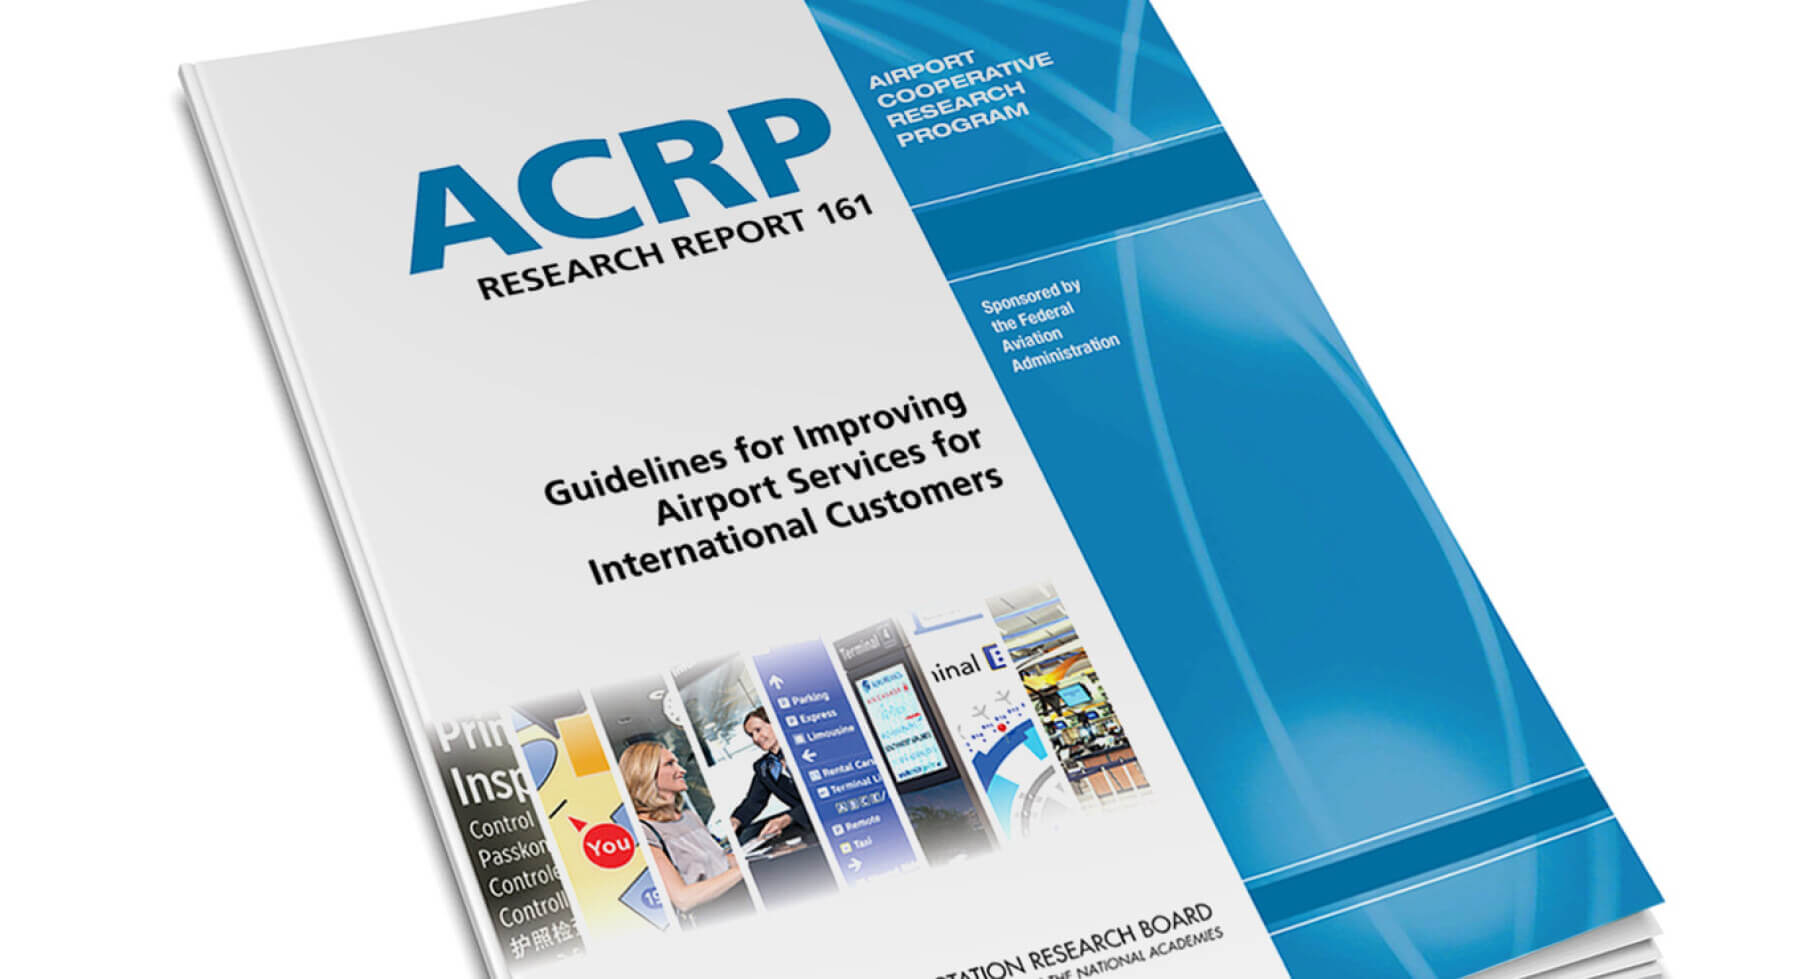 a close up of the cover of ACRP research report 161